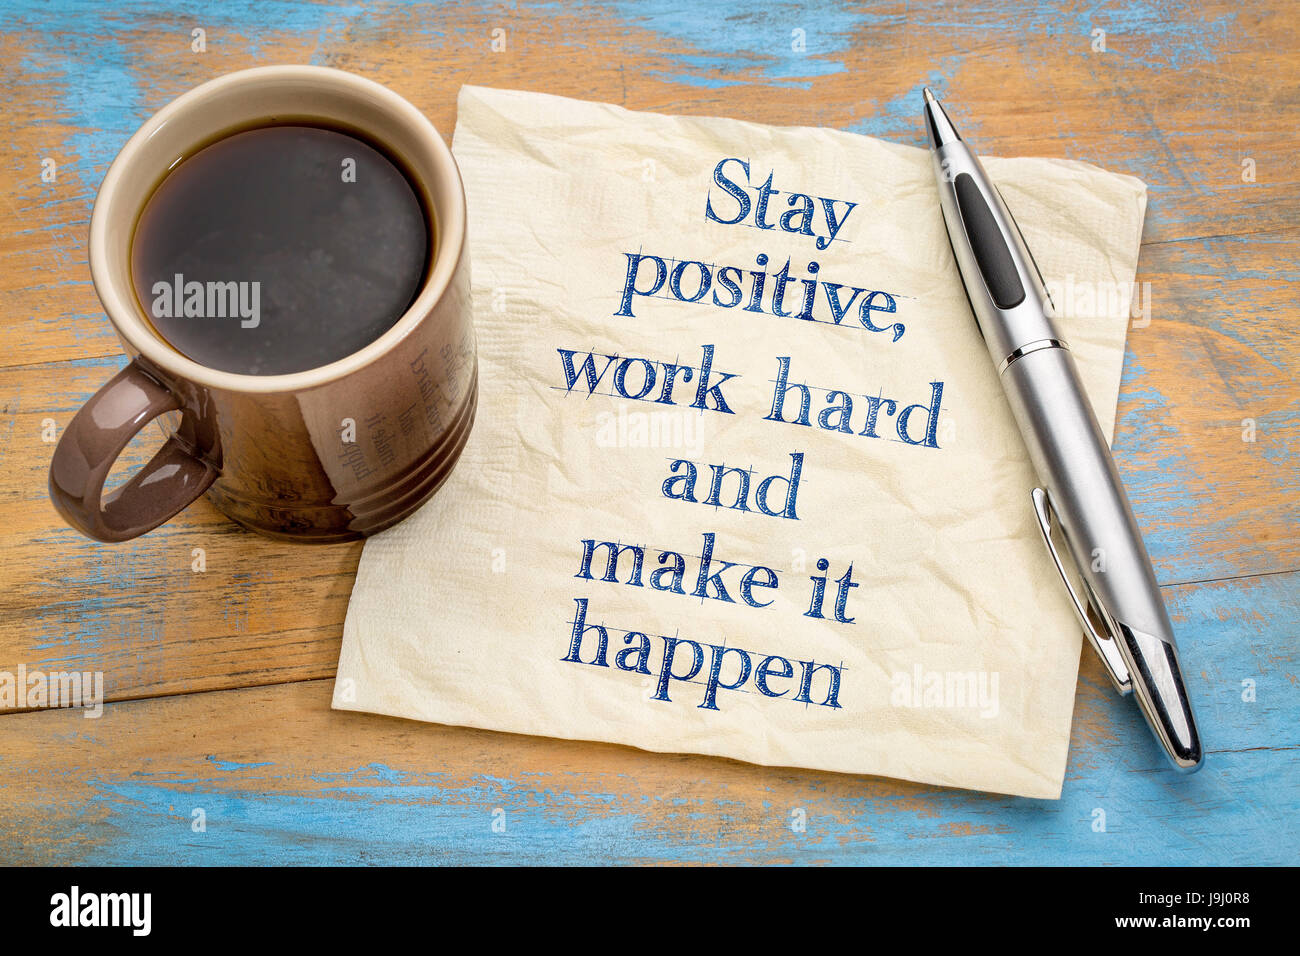 Stay positive, work hard and make it happen - motivational handwriting on a napkin with a cup of coffee Stock Photo